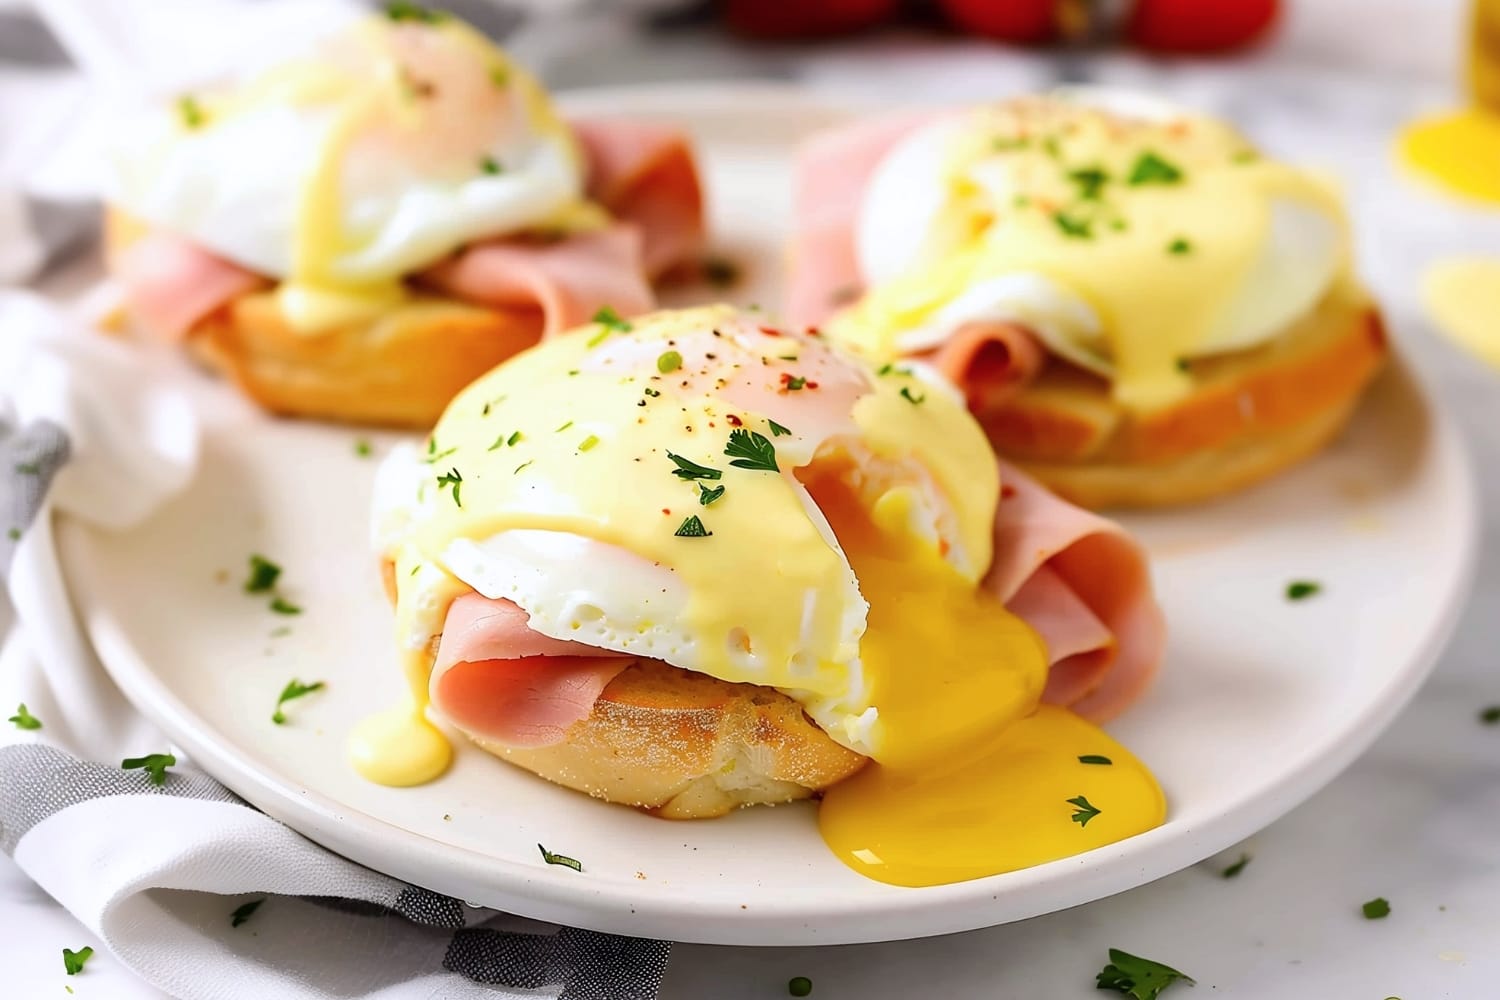 Eggs Benedict with ham, a classic breakfast dish served on a plate with a side of fresh greens